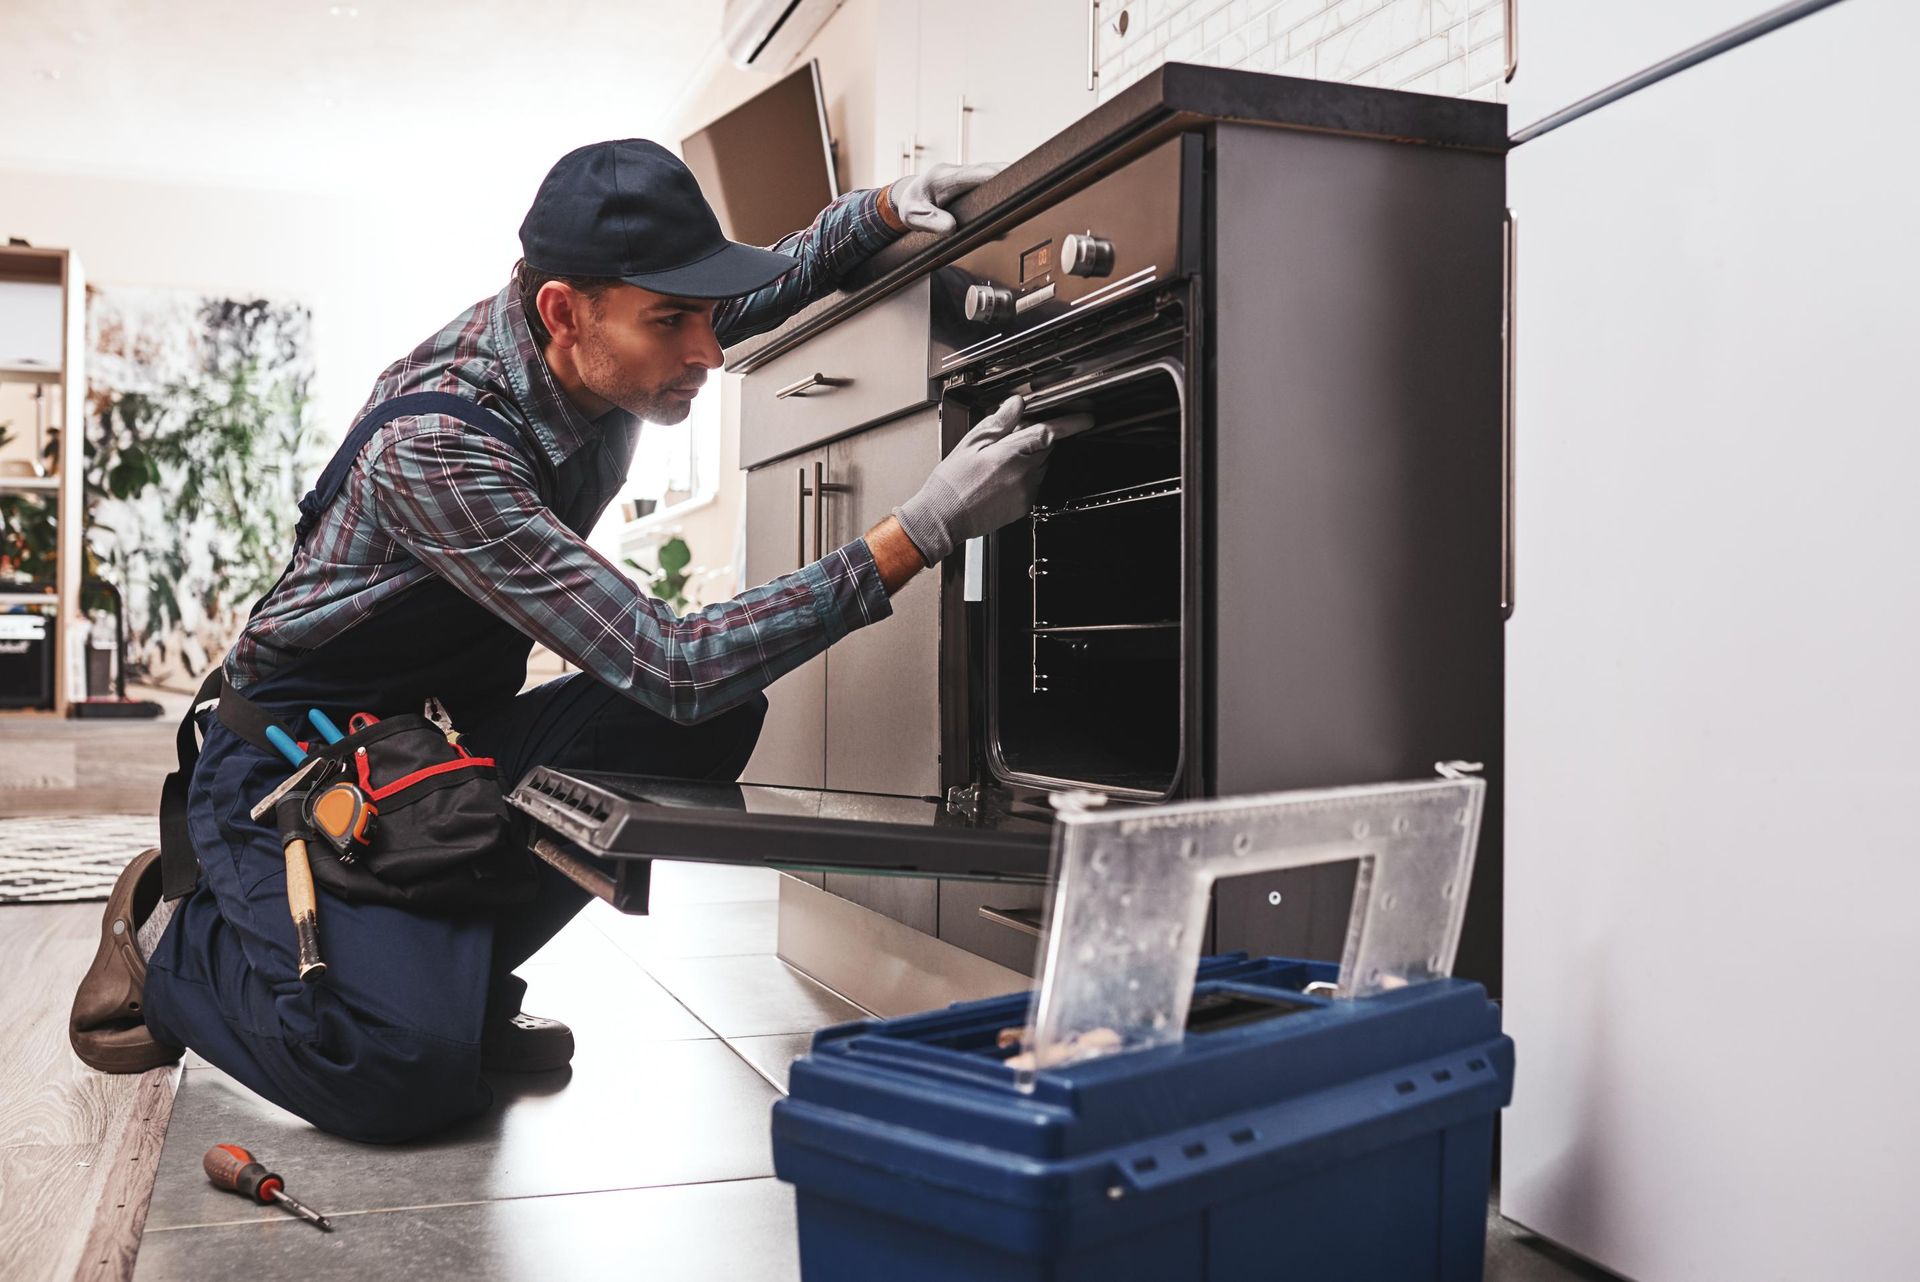 a man is kneeling down in a kitchen fixing an oven .